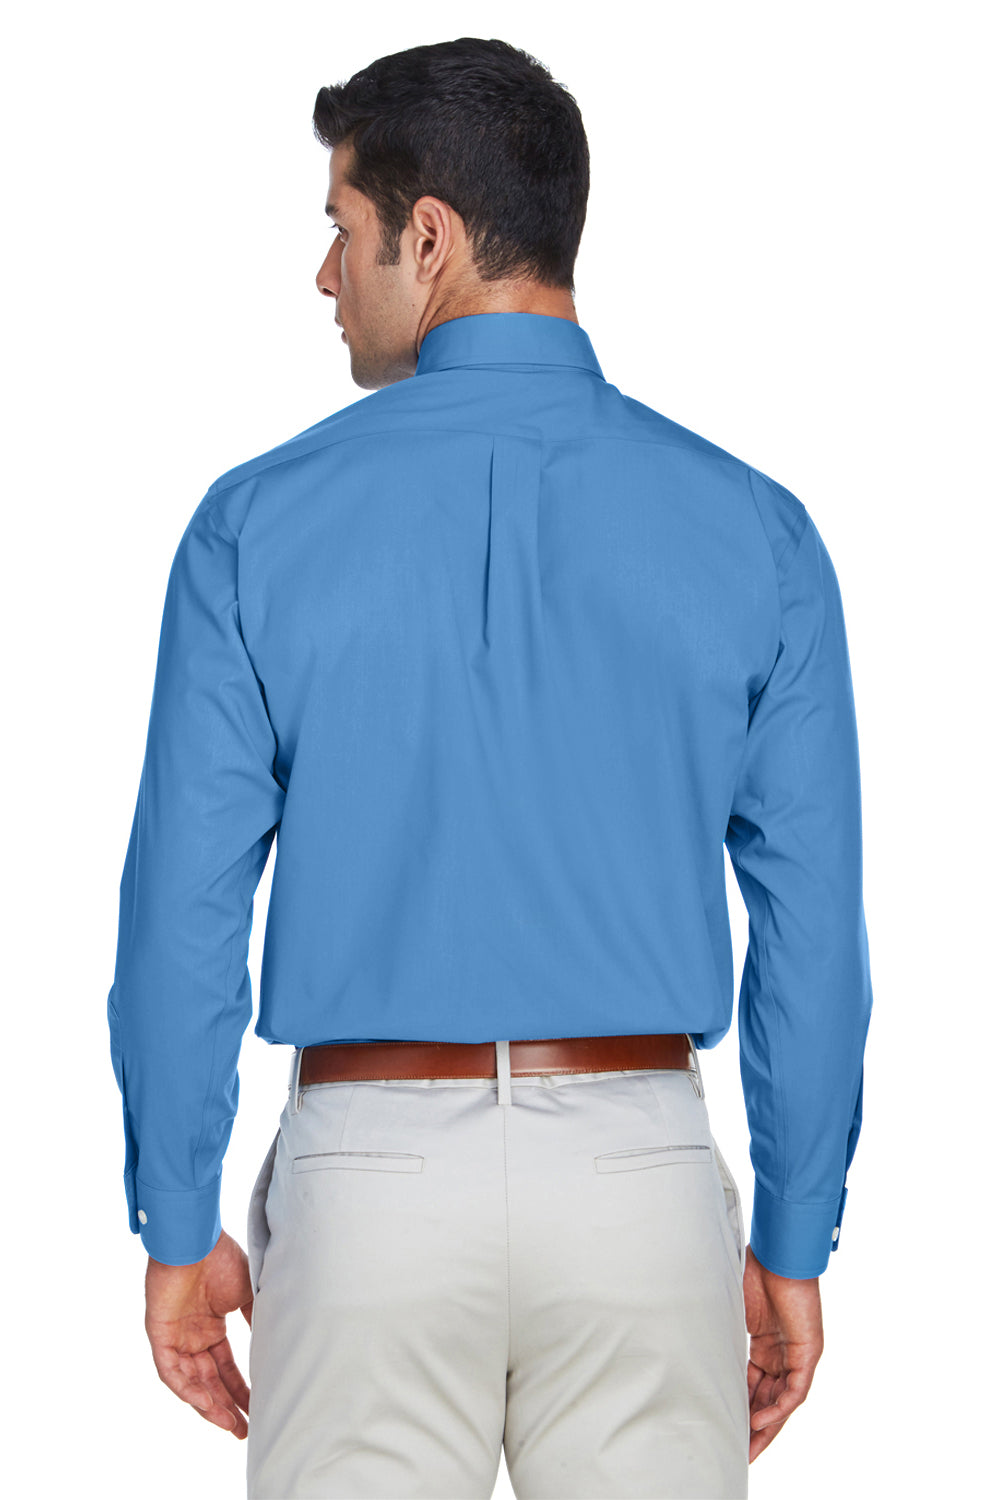 Devon & Jones D620 Mens Crown Woven Collection Wrinkle Resistant Long Sleeve Button Down Shirt w/ Pocket French Blue Back